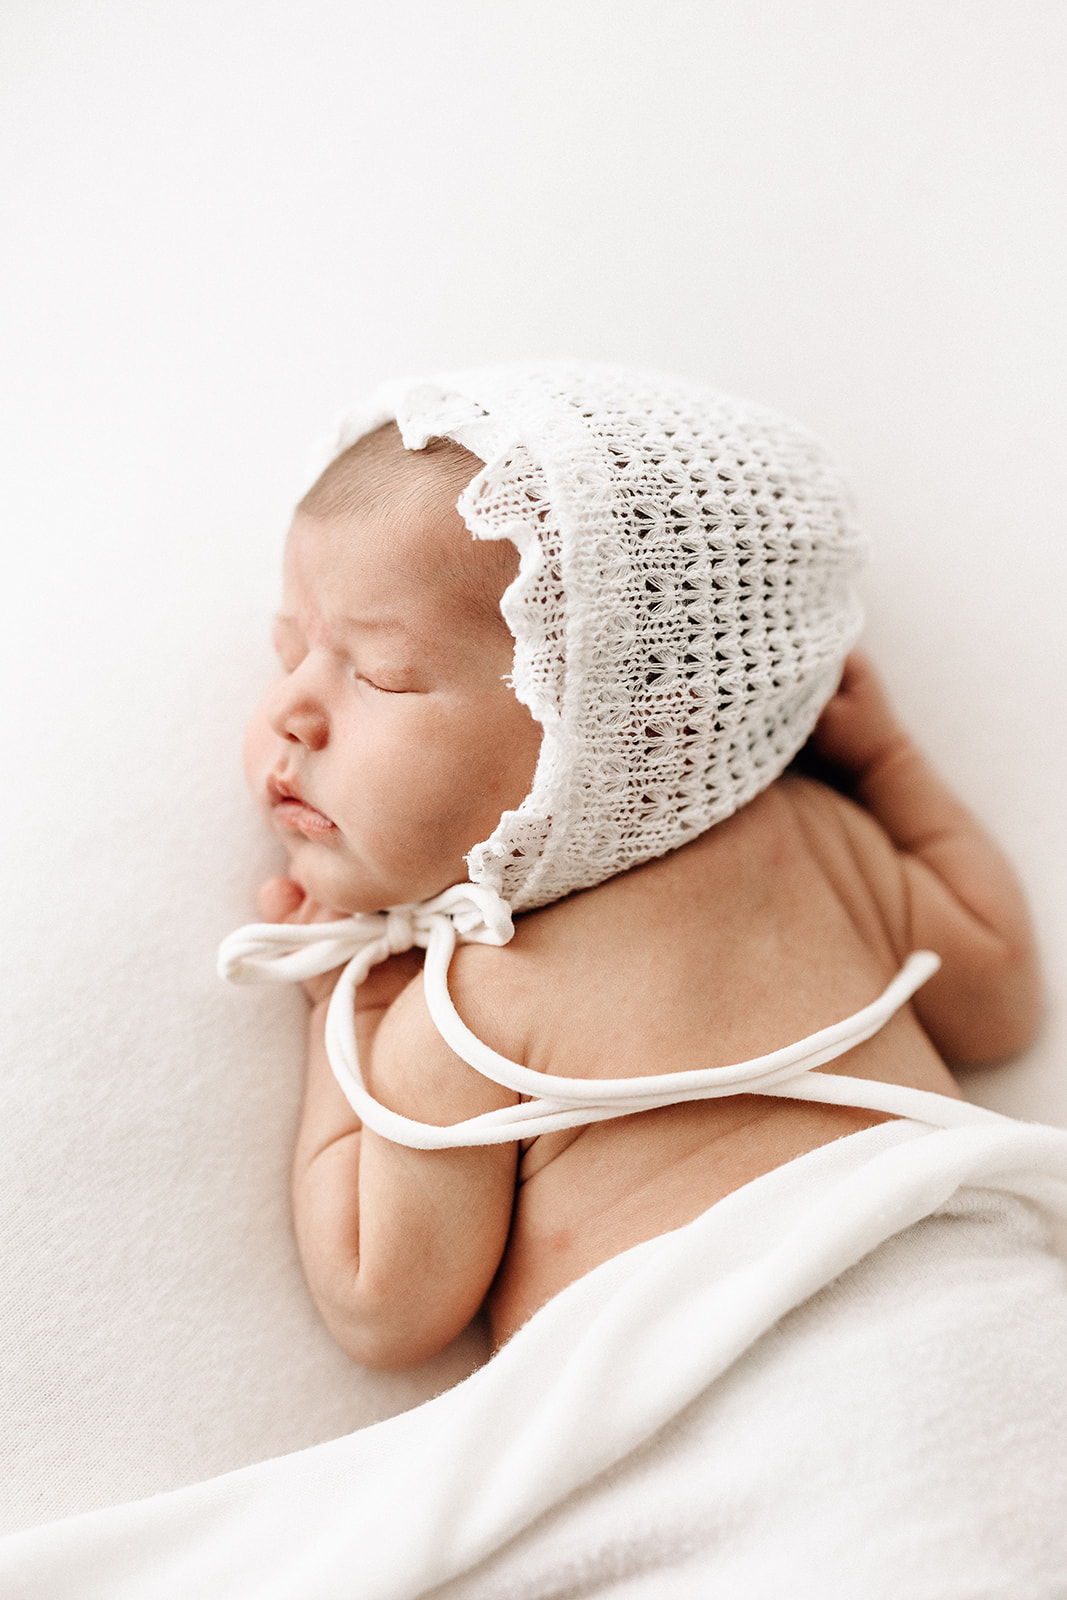 A newborn baby in a white knit bonnet sleeps on her stomach before visiting St. Louis Pediatricians